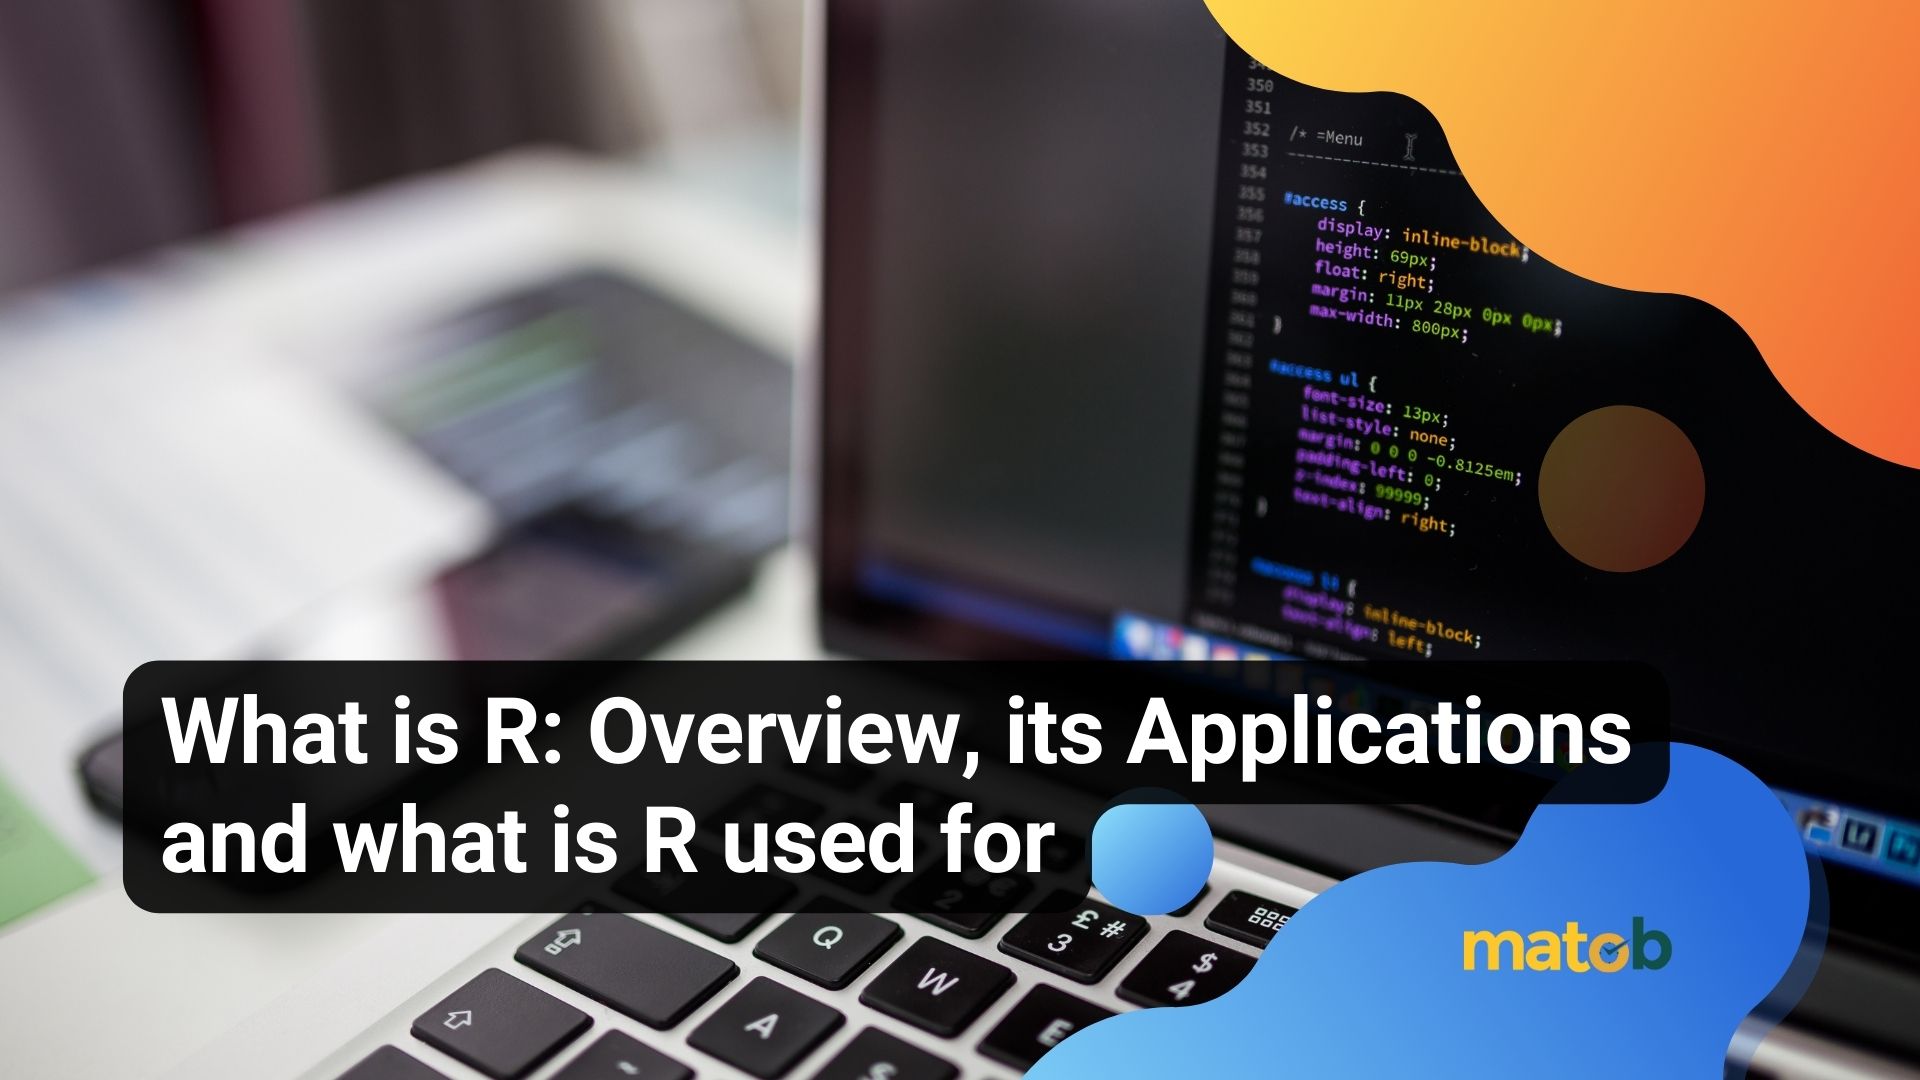 What is R: Overview, its Applications and what is R used for